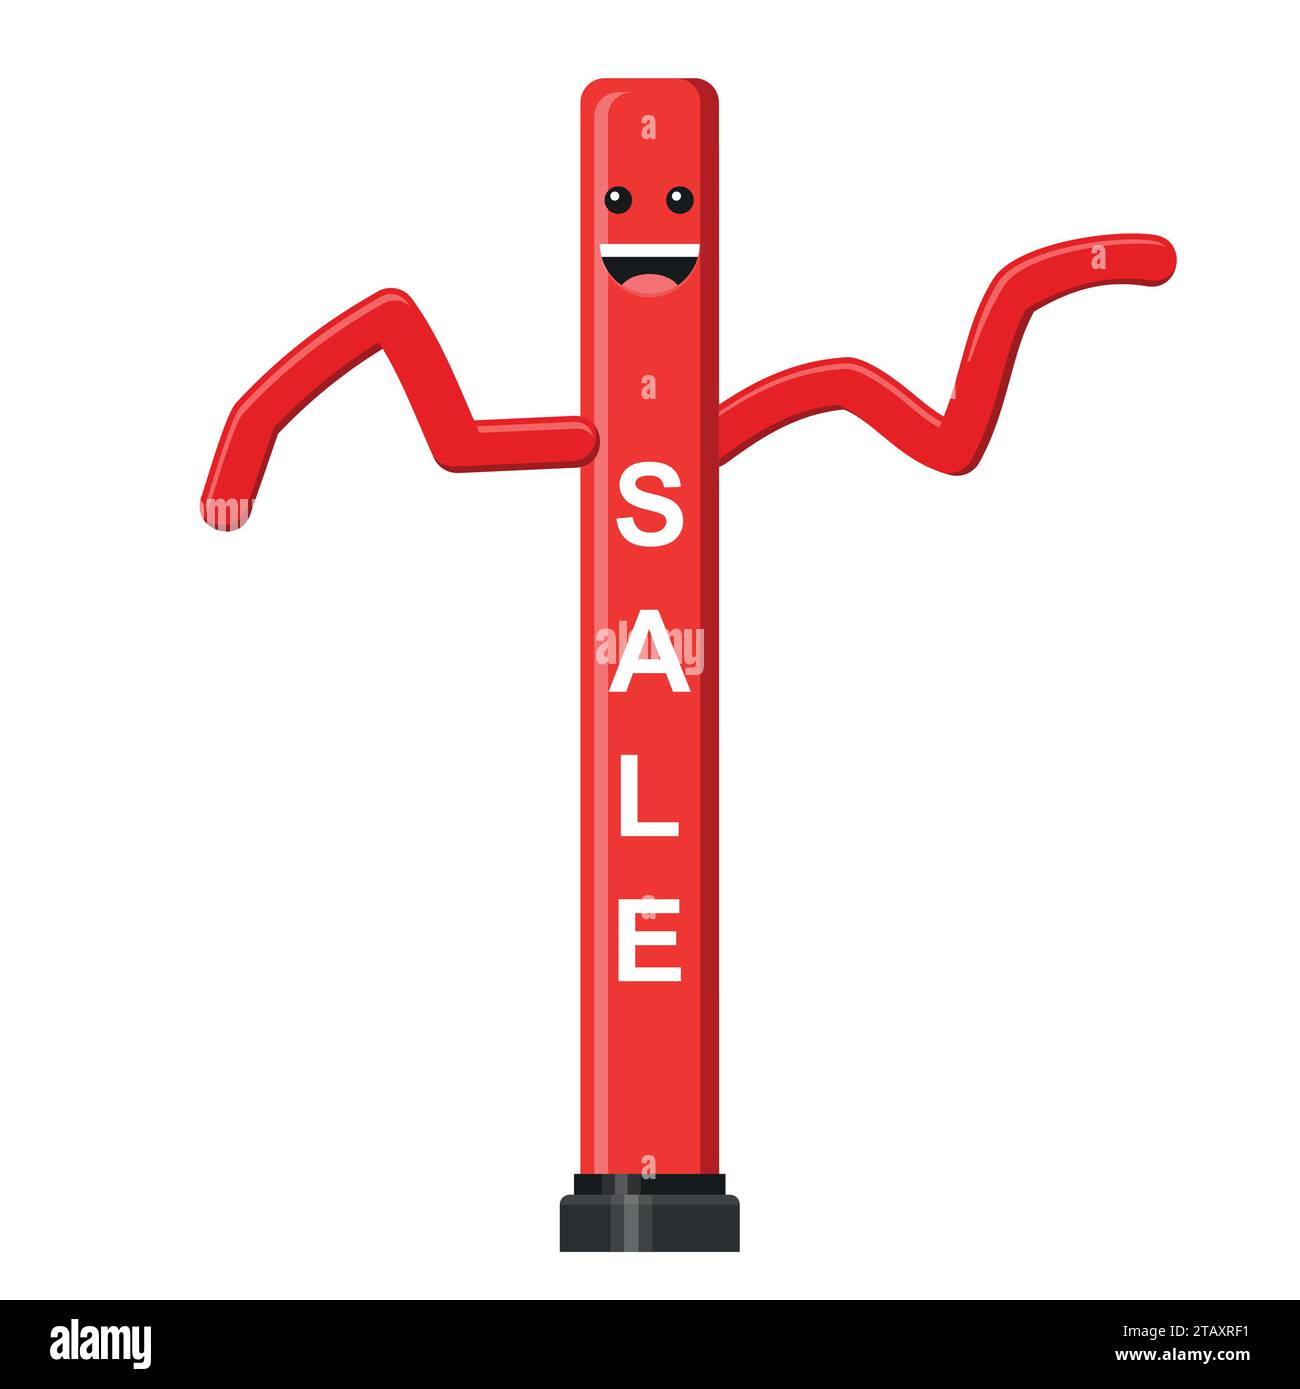 Dancing inflatable red tube man in flat style isolated on white background. Wacky waving air hand for sales and advertising. Vector illustration Stock Vector